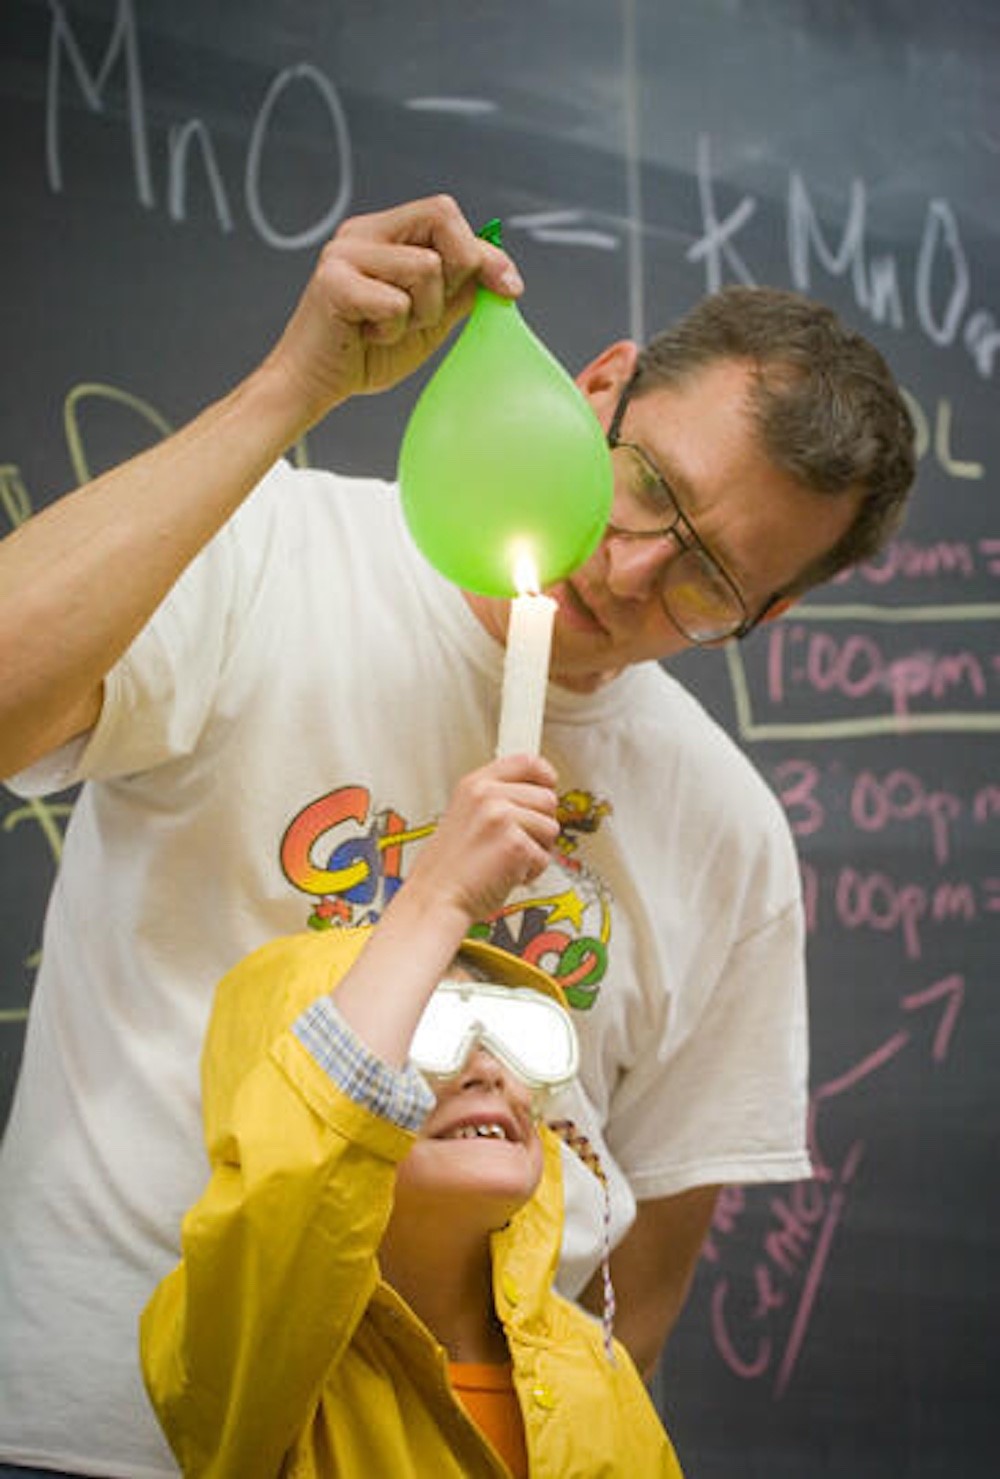 A man and a child stand in front of a blackboard. The man is holding a balloon, and the child is lifting a lit candle towards it.